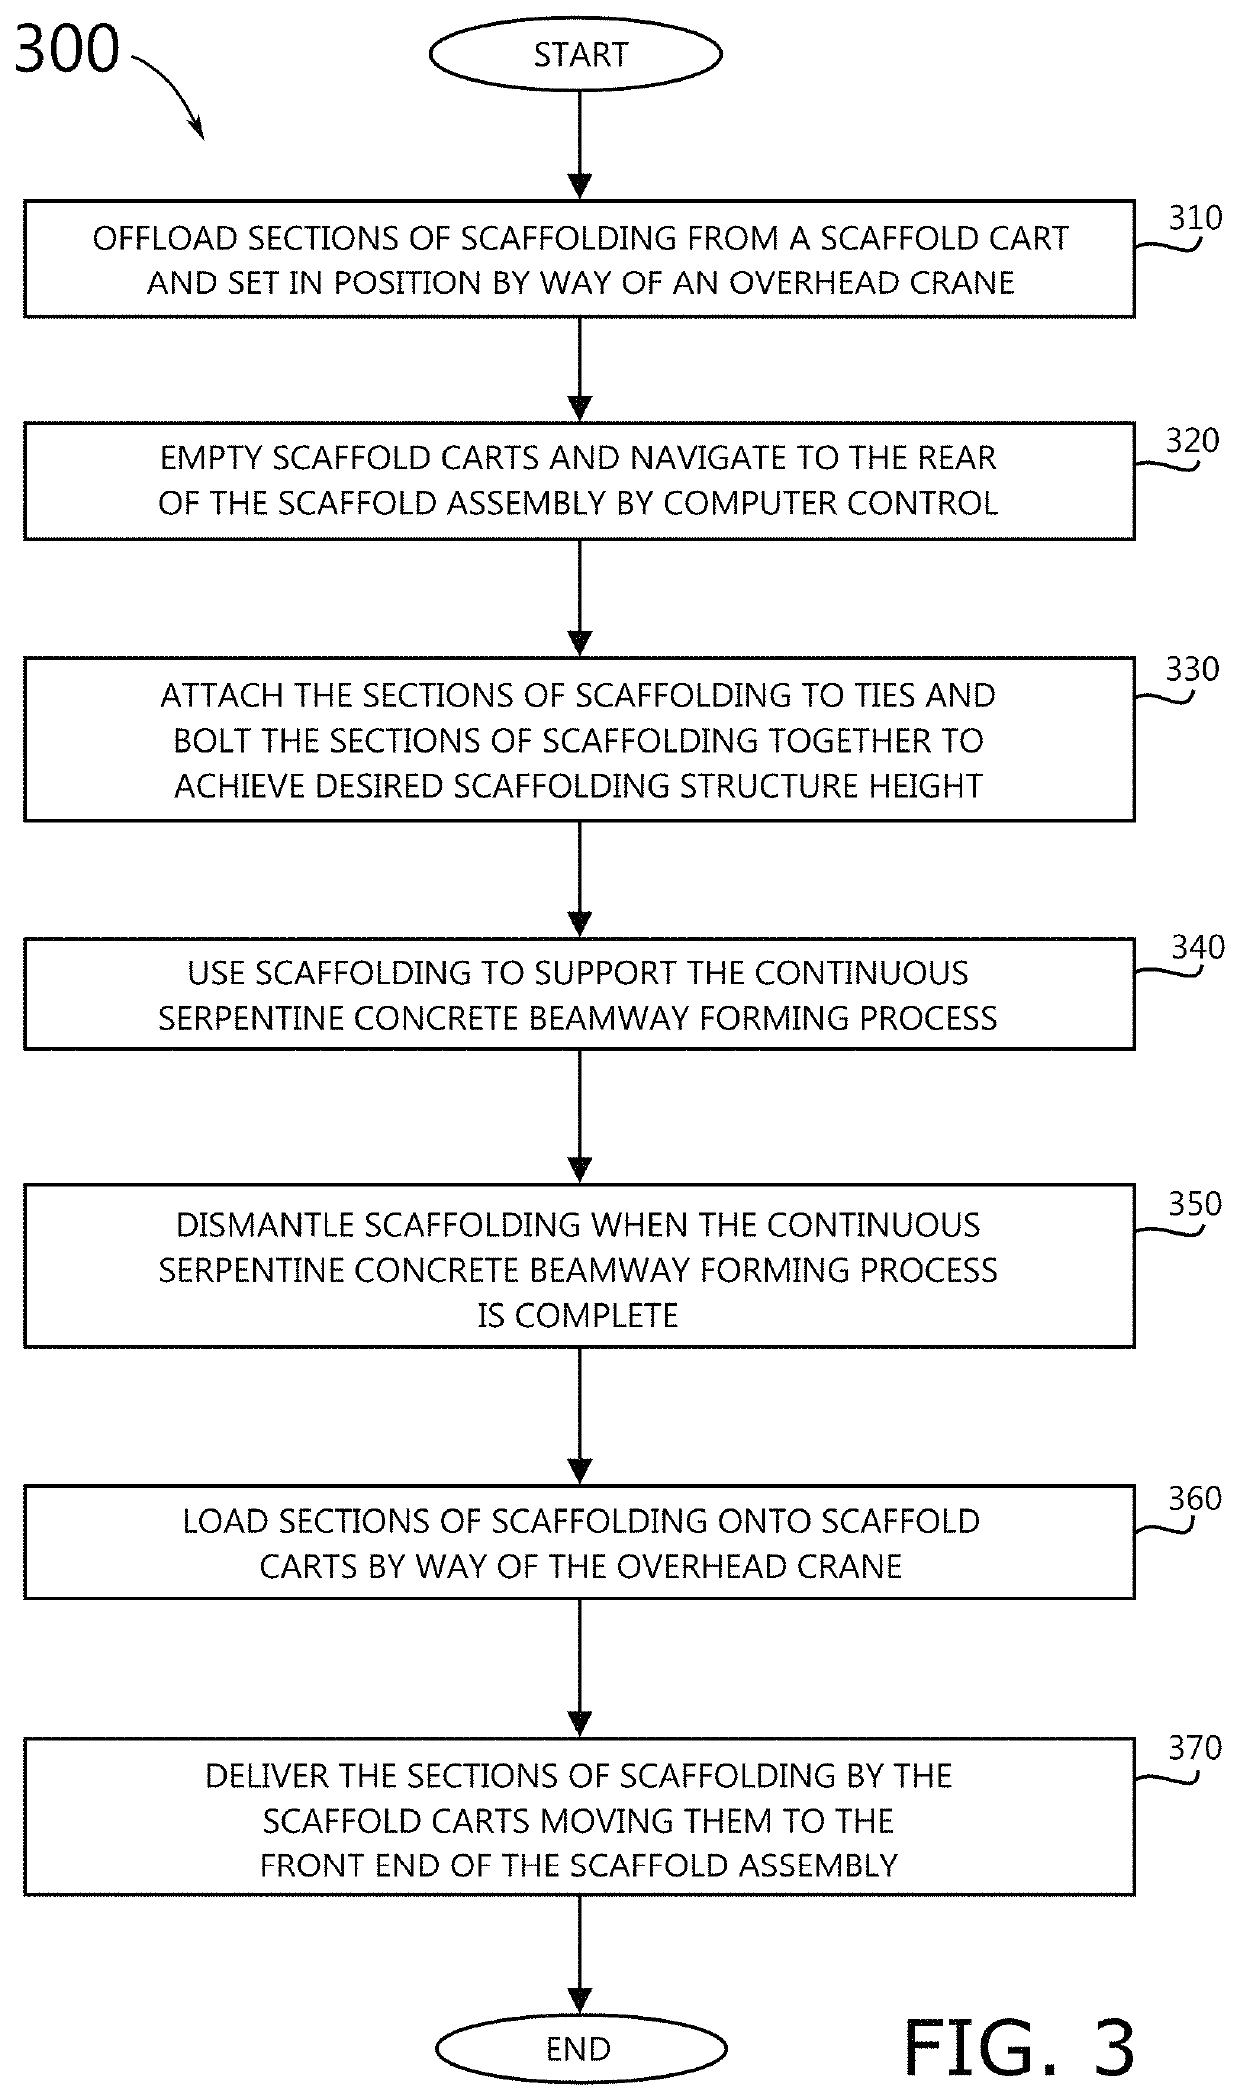 Continuous serpentine concrete beamway forming system and a method for creating a hollow continuous serpentine concrete beamway